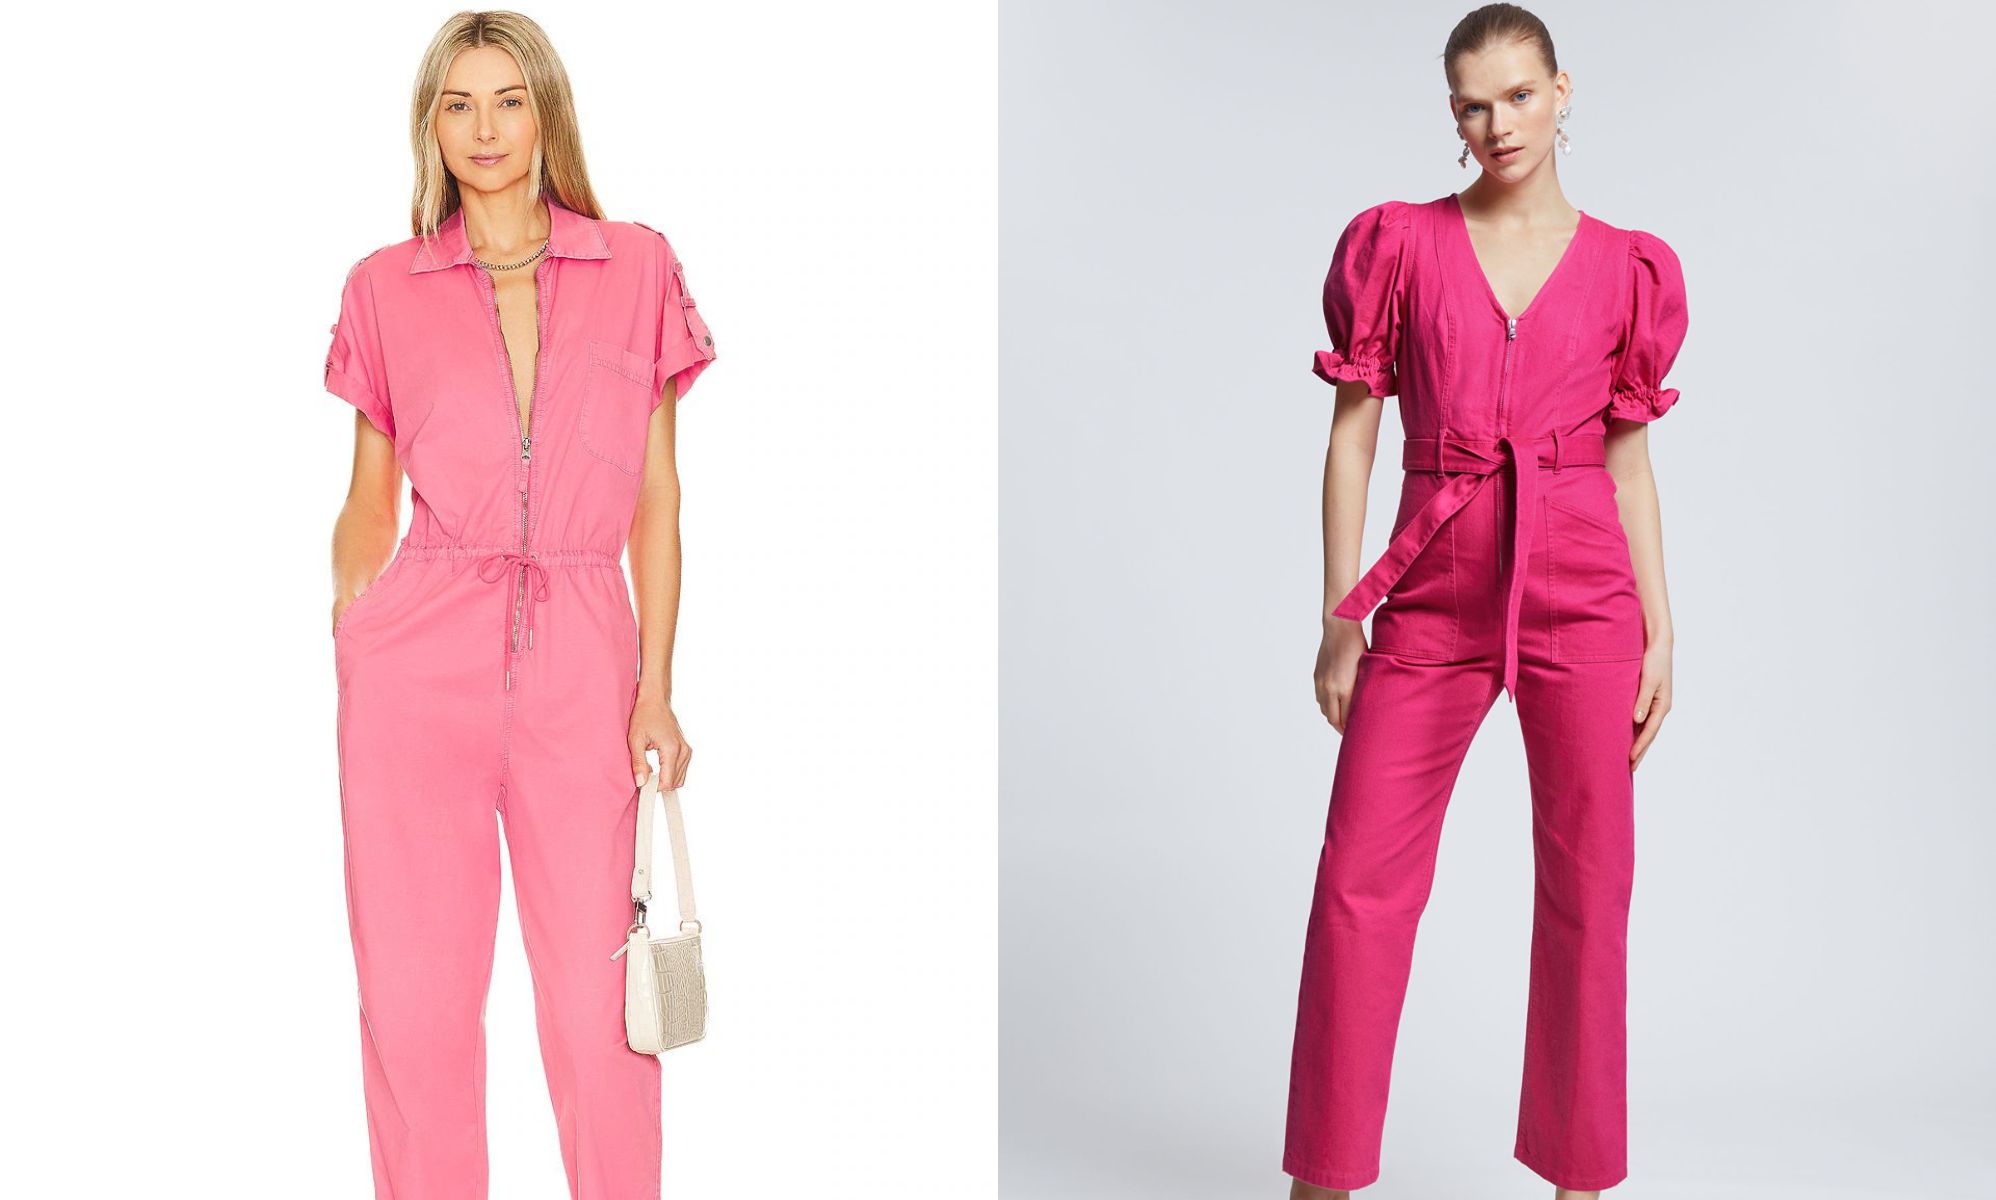 How to get the pink boilersuits from the Barbie movie